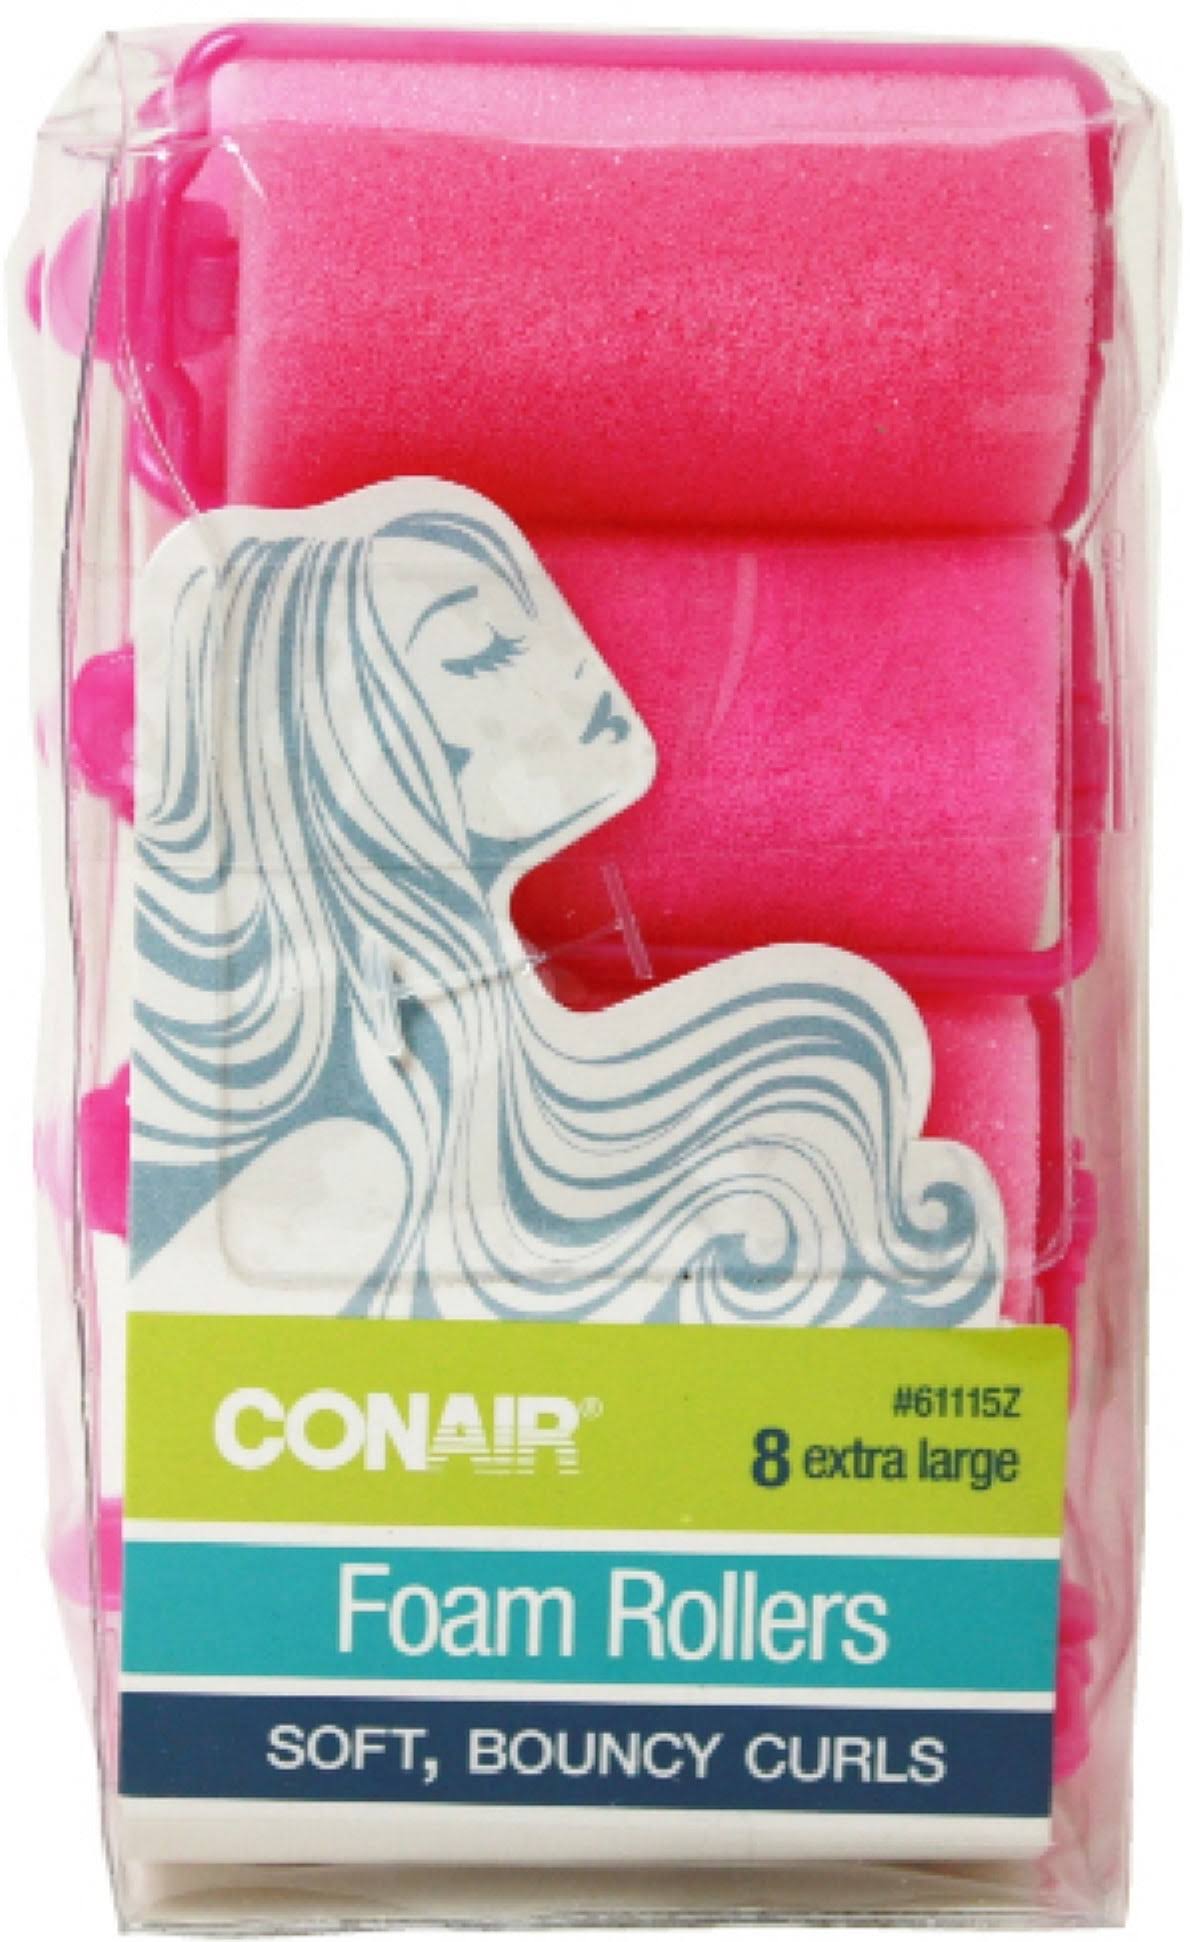 Conair Foam Rollers - Extra Large